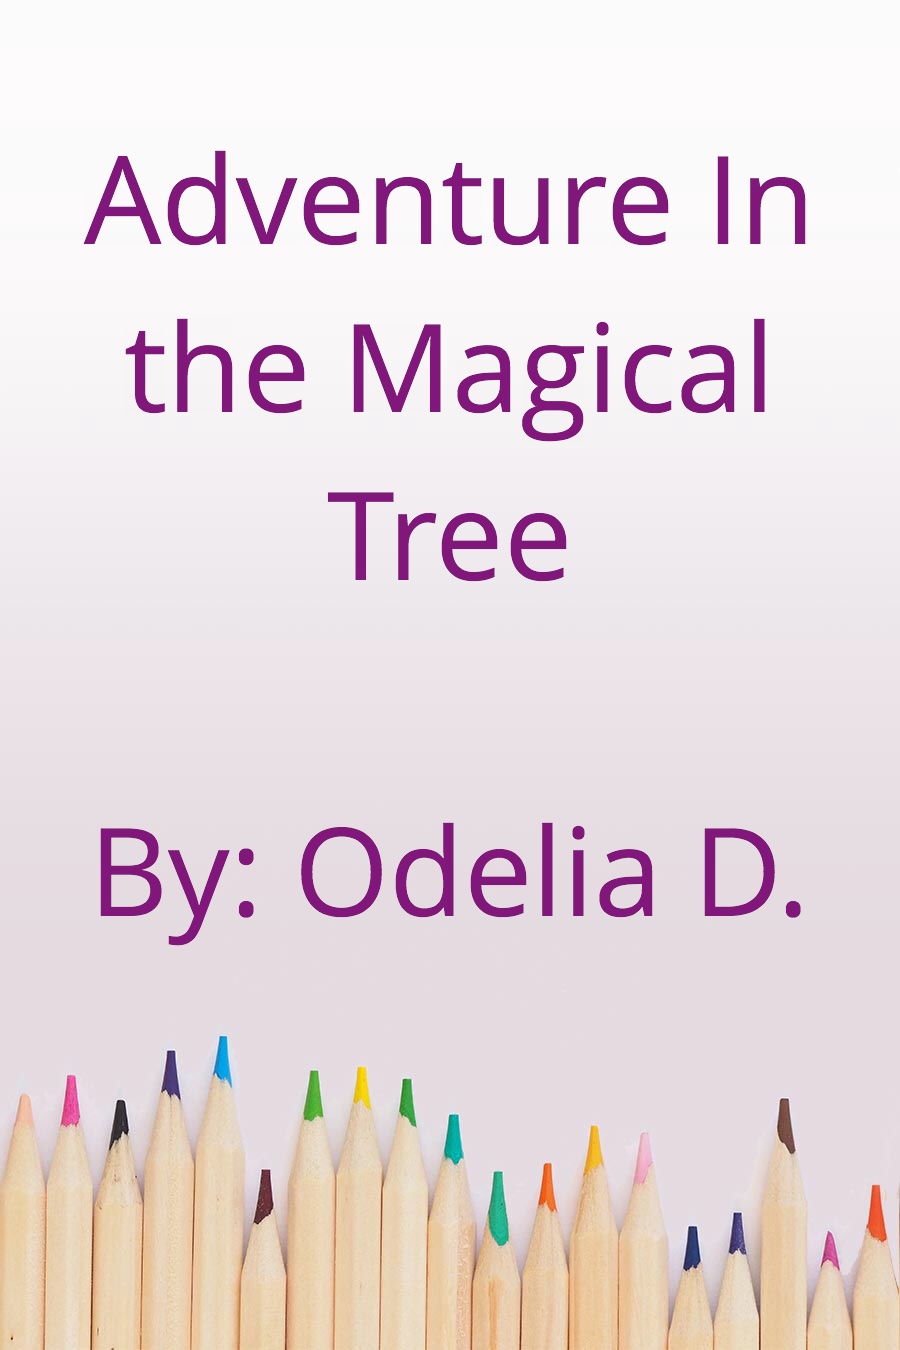 Adventure in the Magical Tree